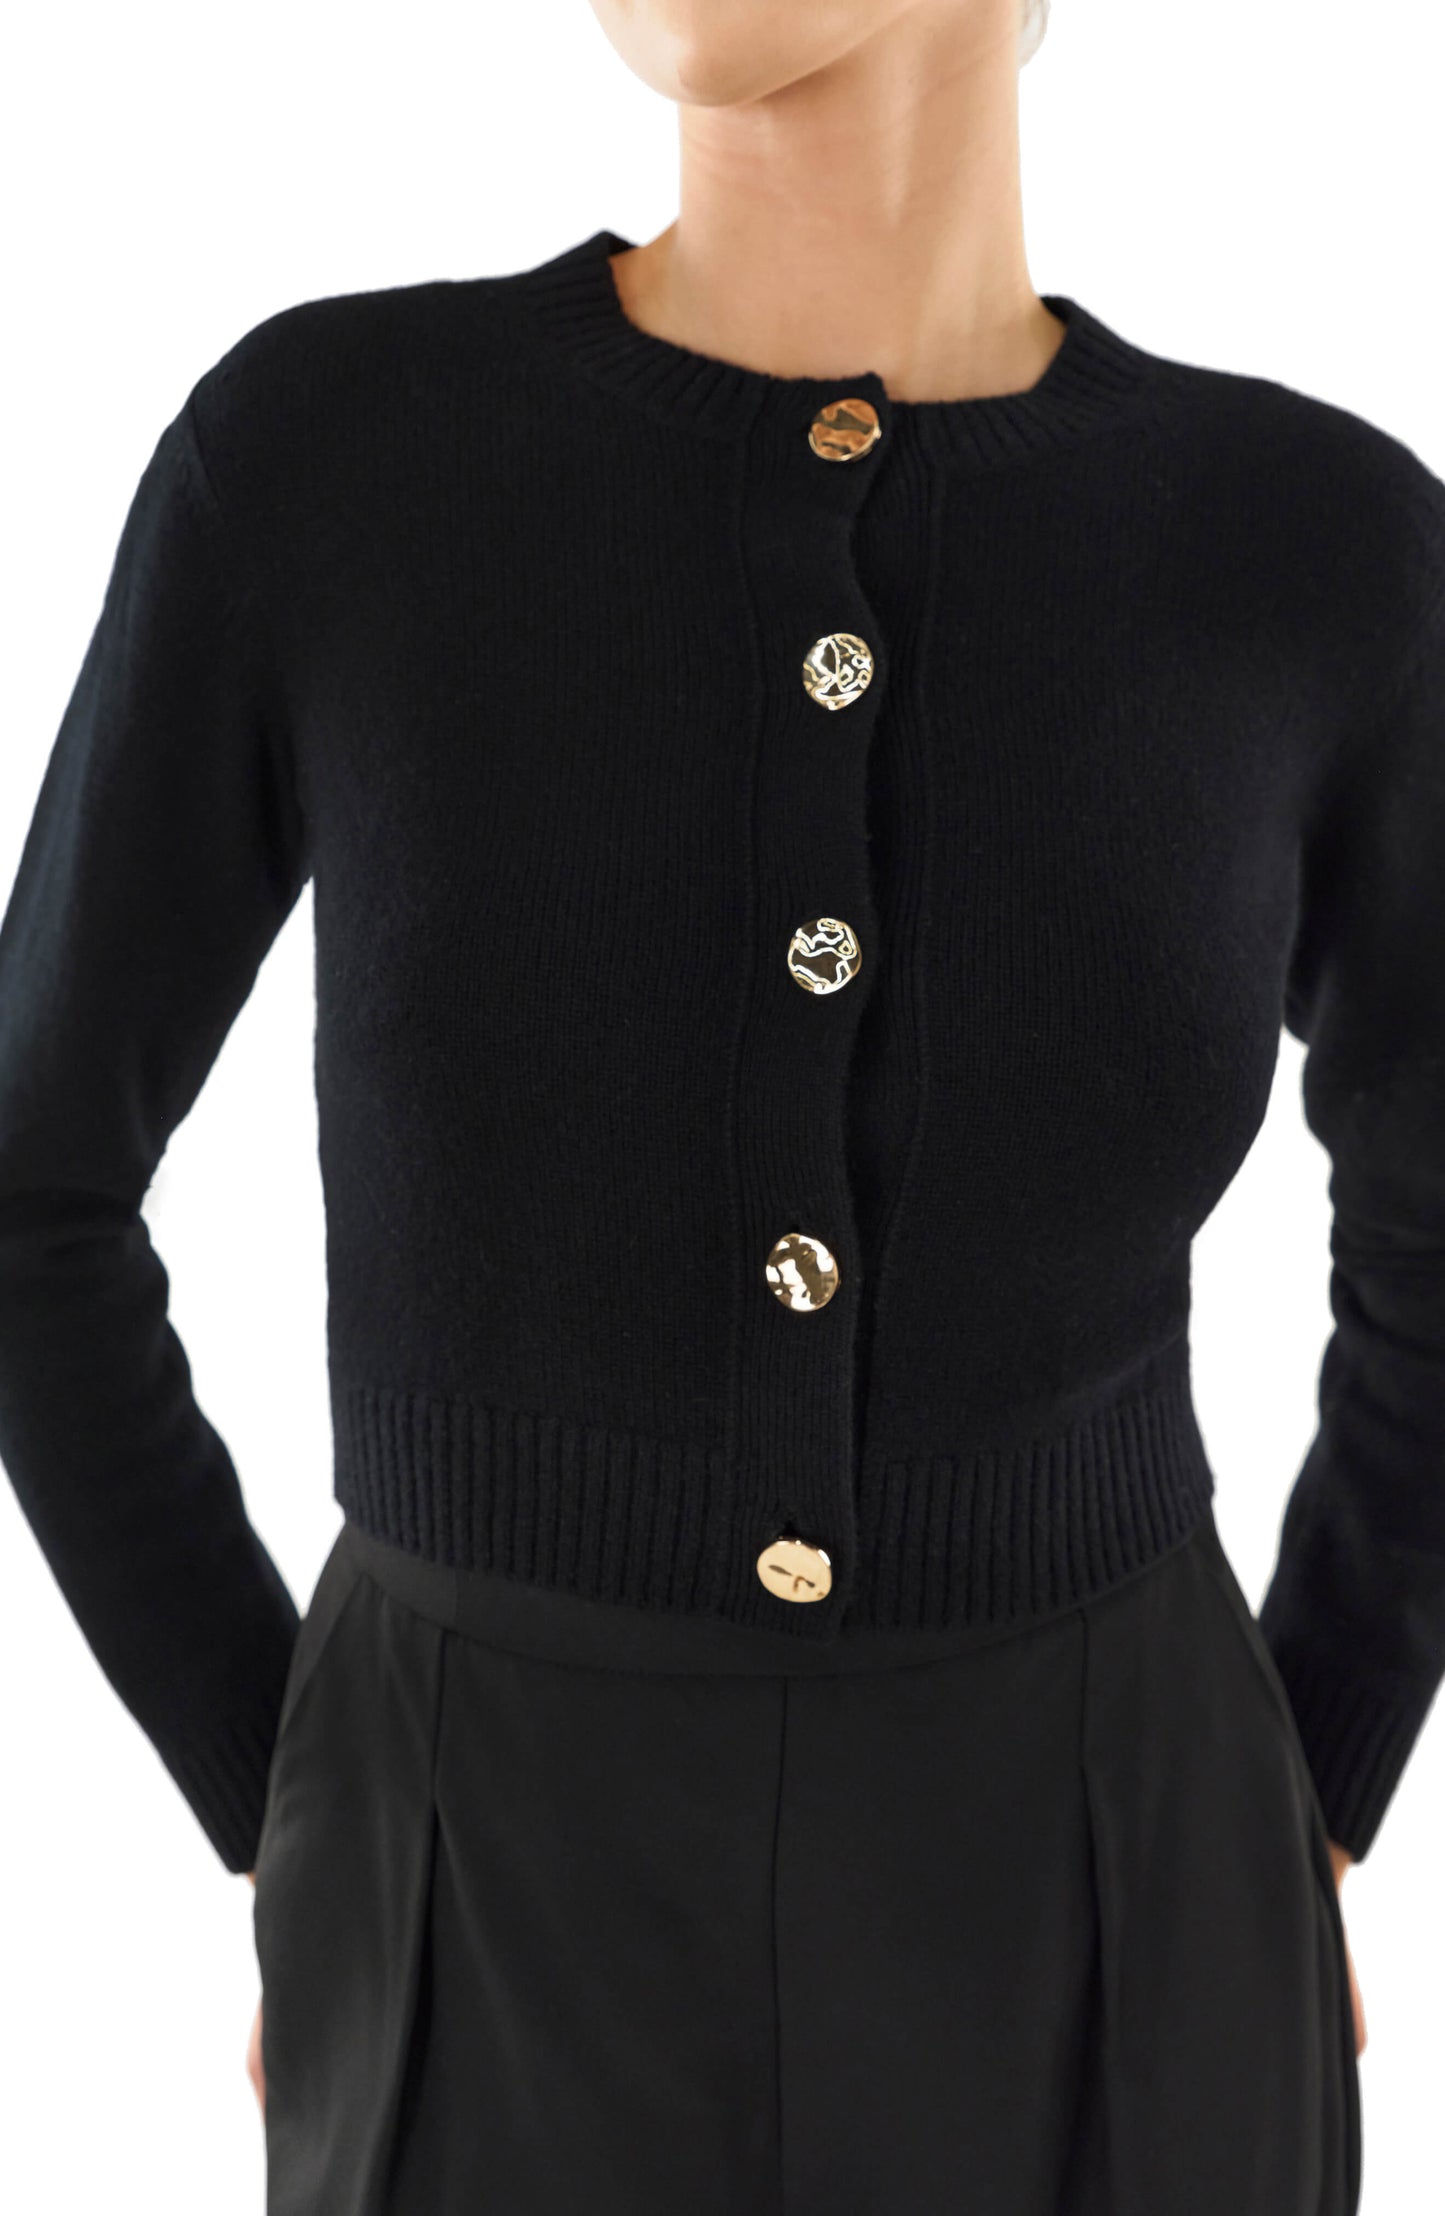 Monique Lhuillier black long sleeve cropped cardigan with gold buttons.